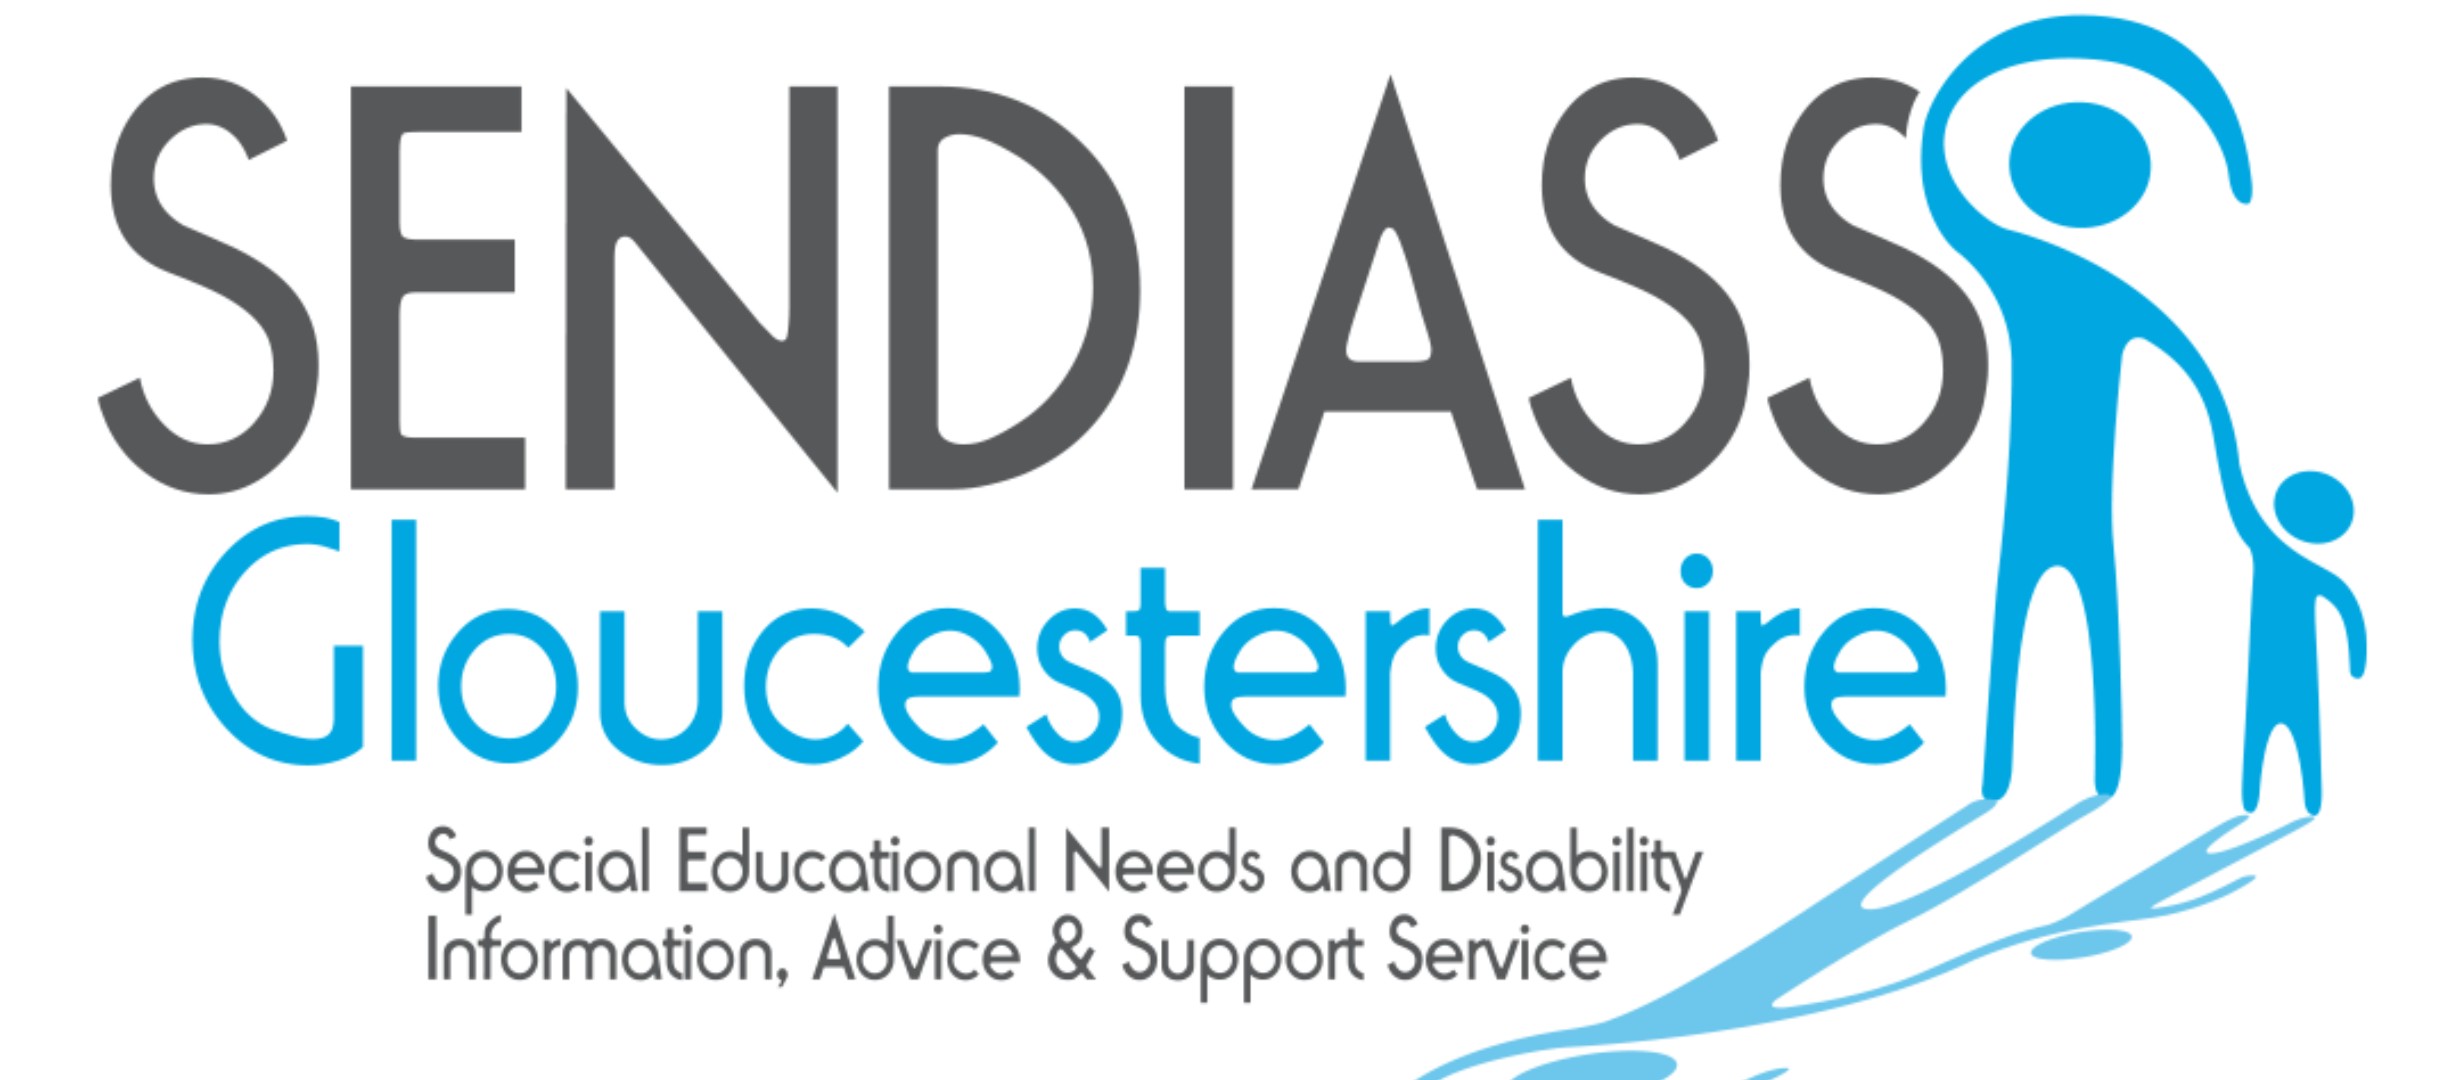 SENDIASS Gloucestershire Logo and text: Special Educational Needs & Disability Information, Advice & support service